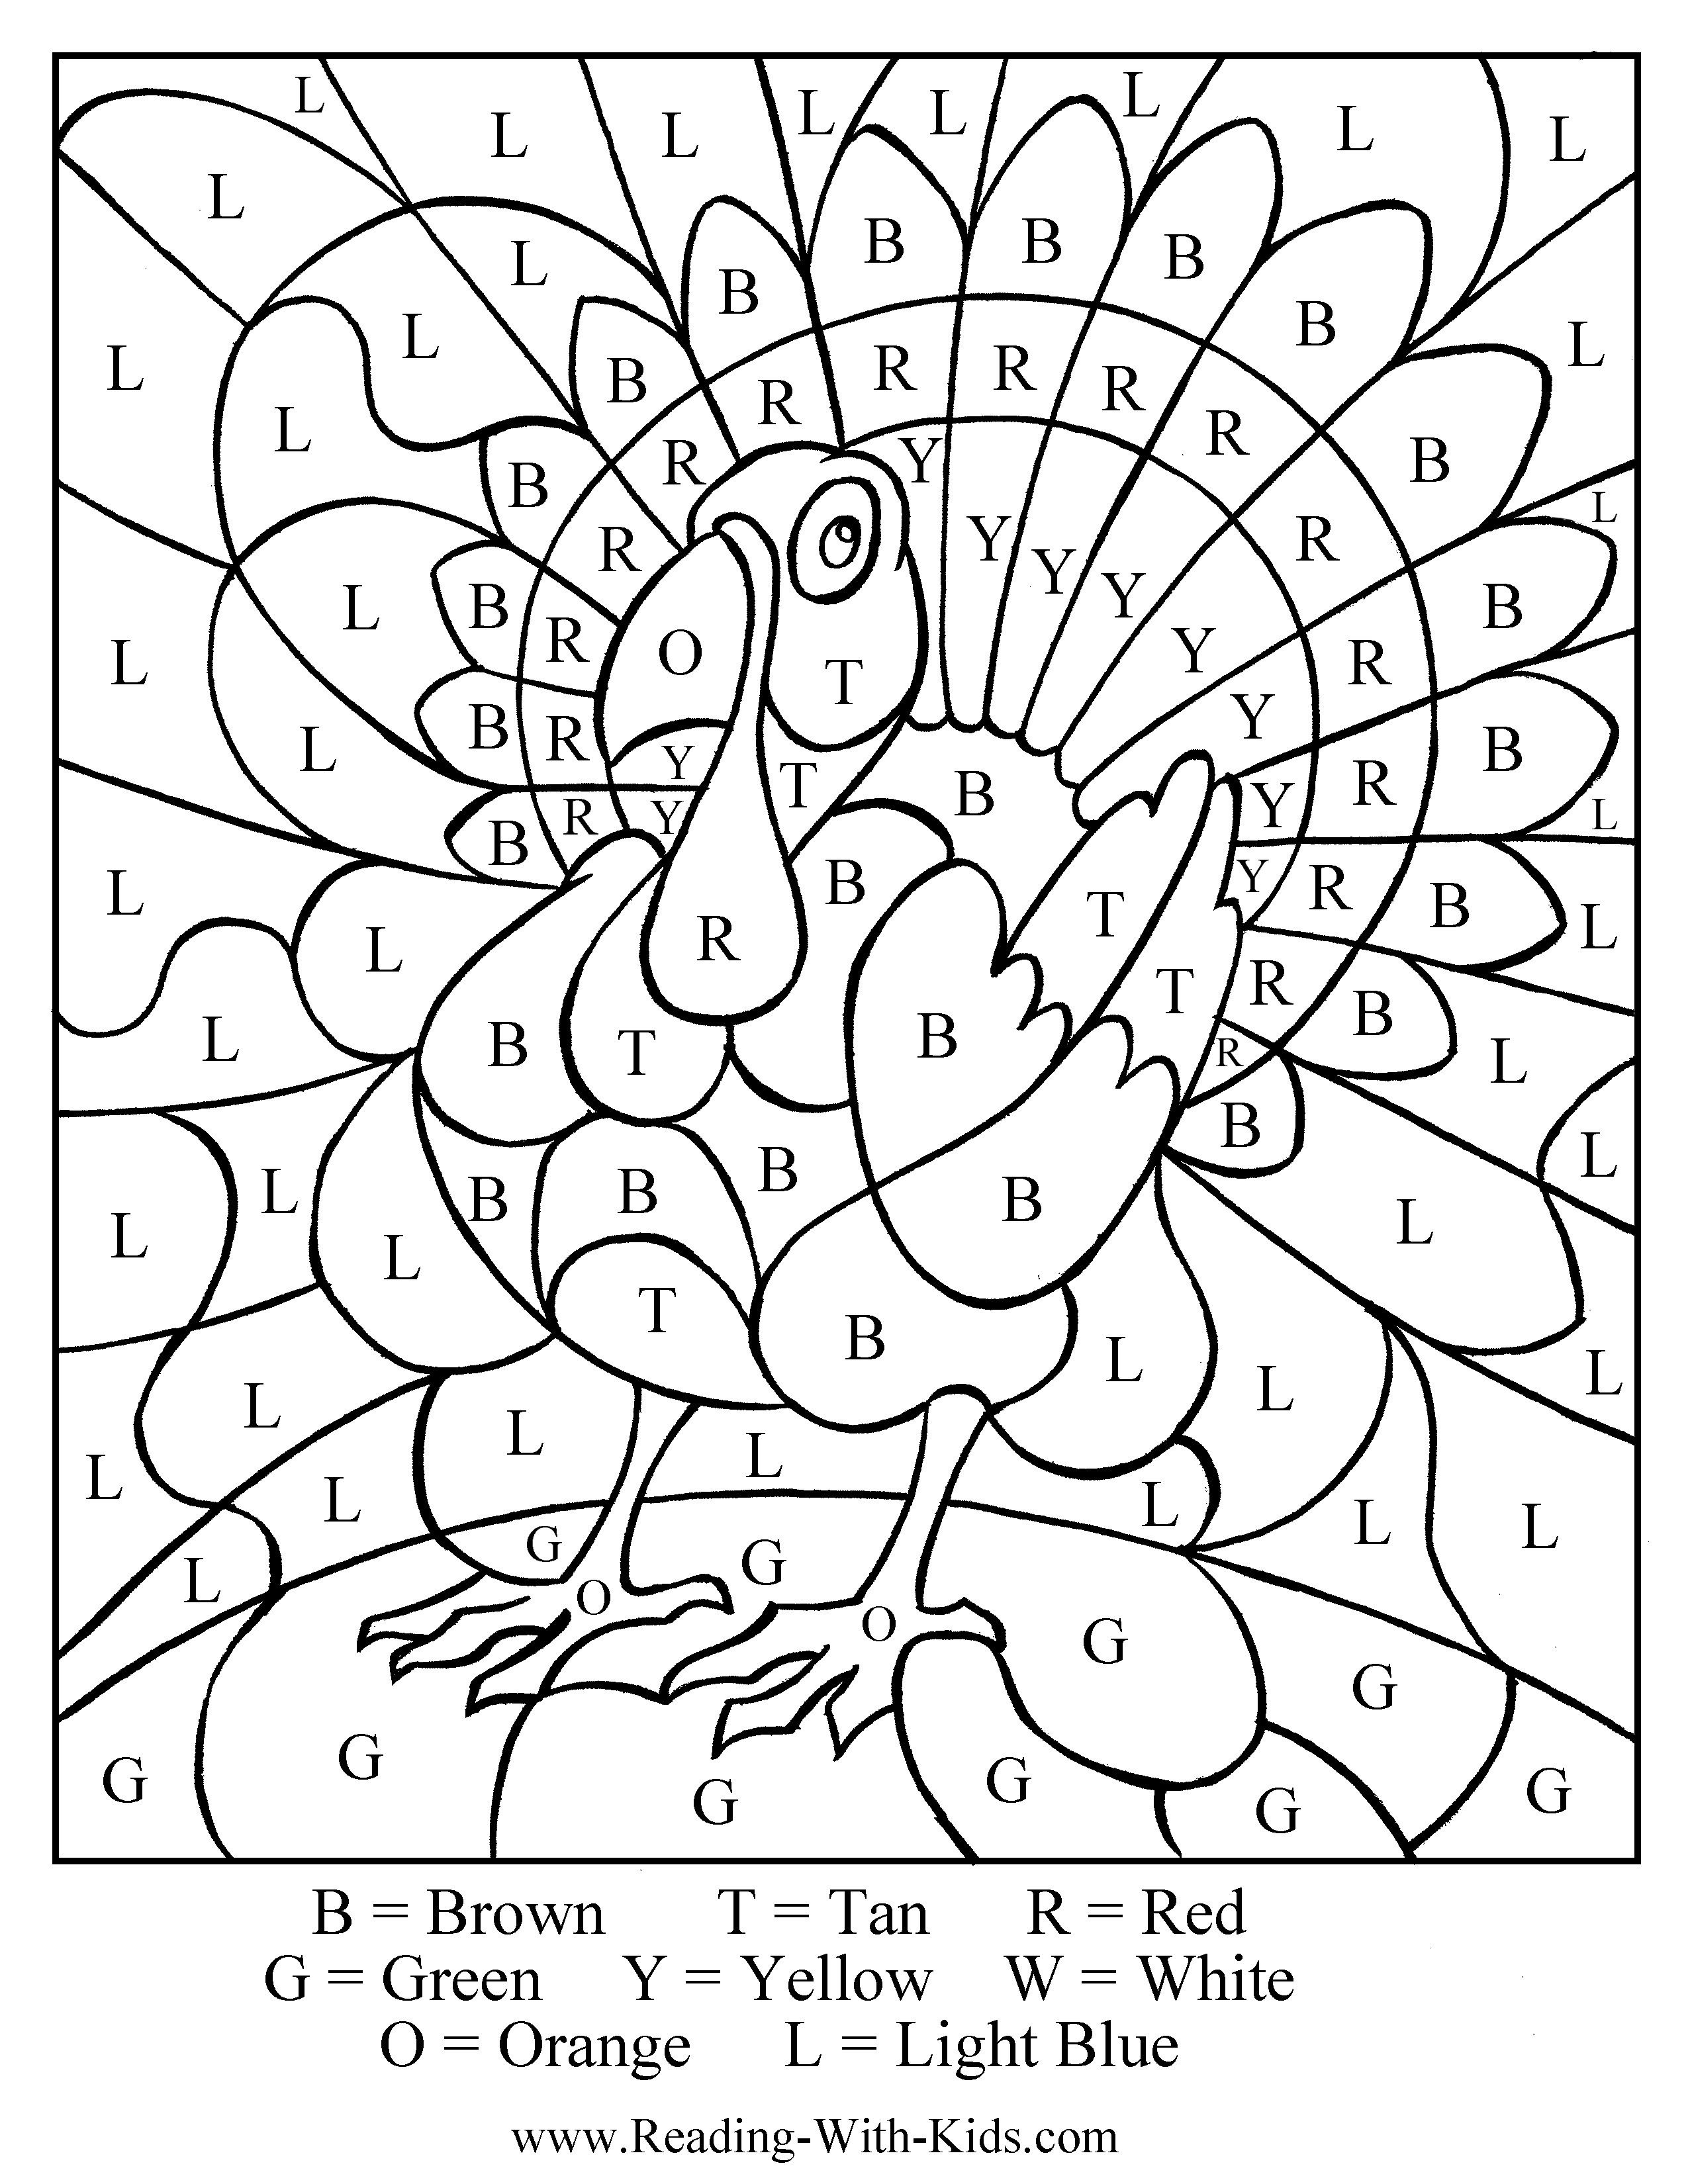 Colorletter Turkey - Great Idea For Thanksgiving #thanksgiving - Free Printable Turkey Craft